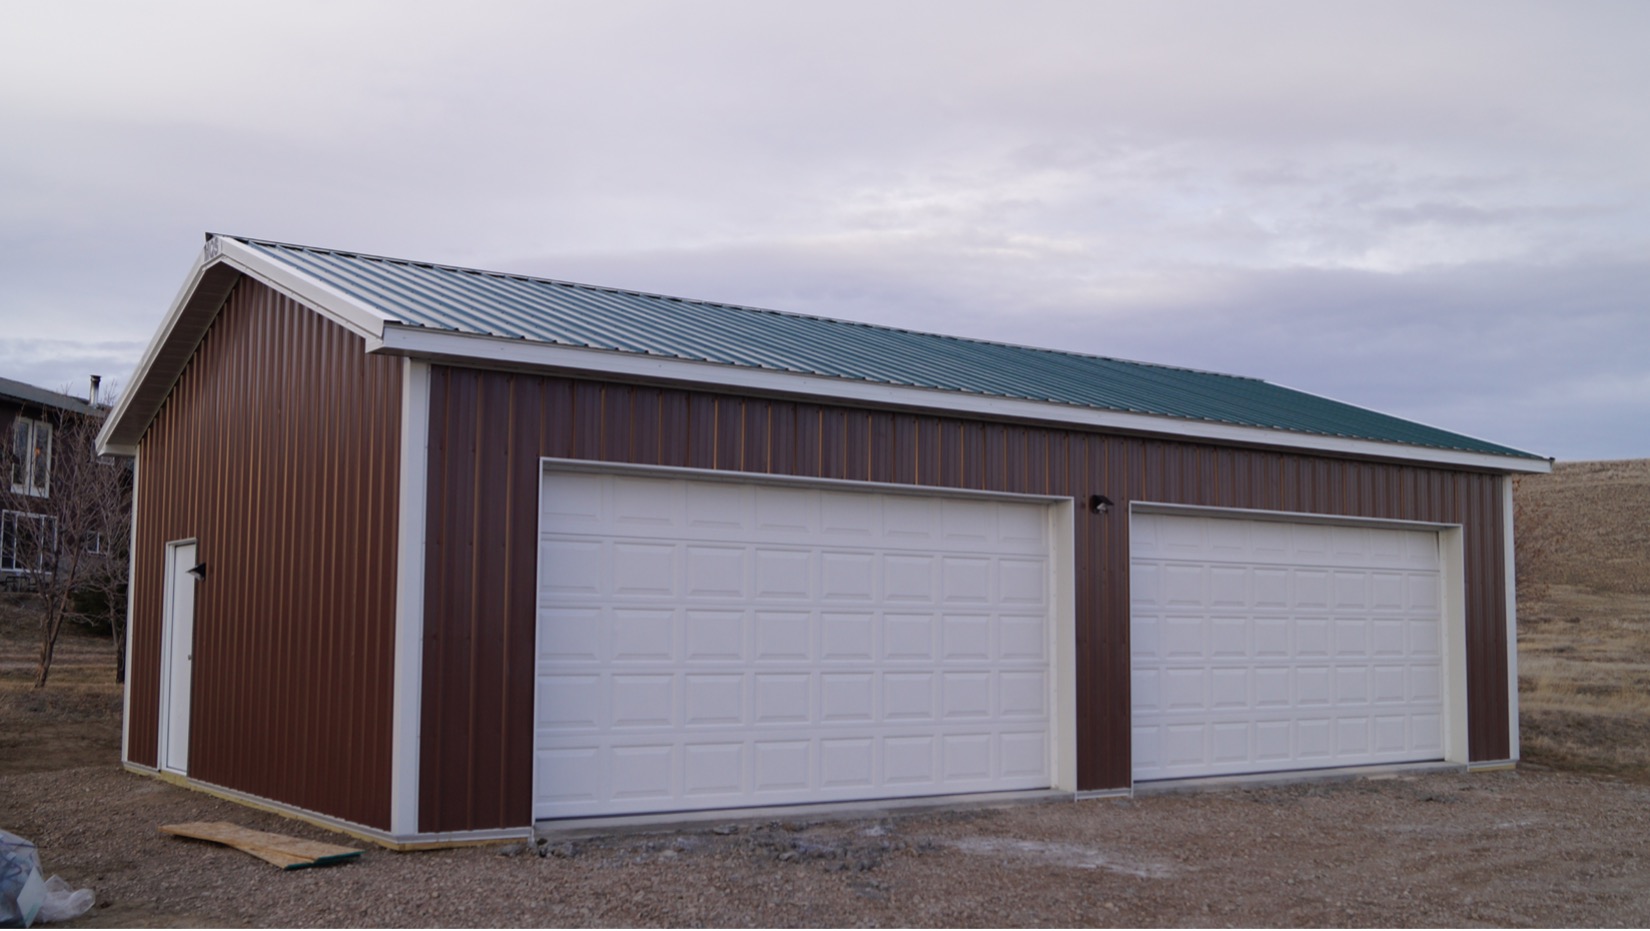 10 Innovative Ways to Make Your Garage in Chewelah More Functional